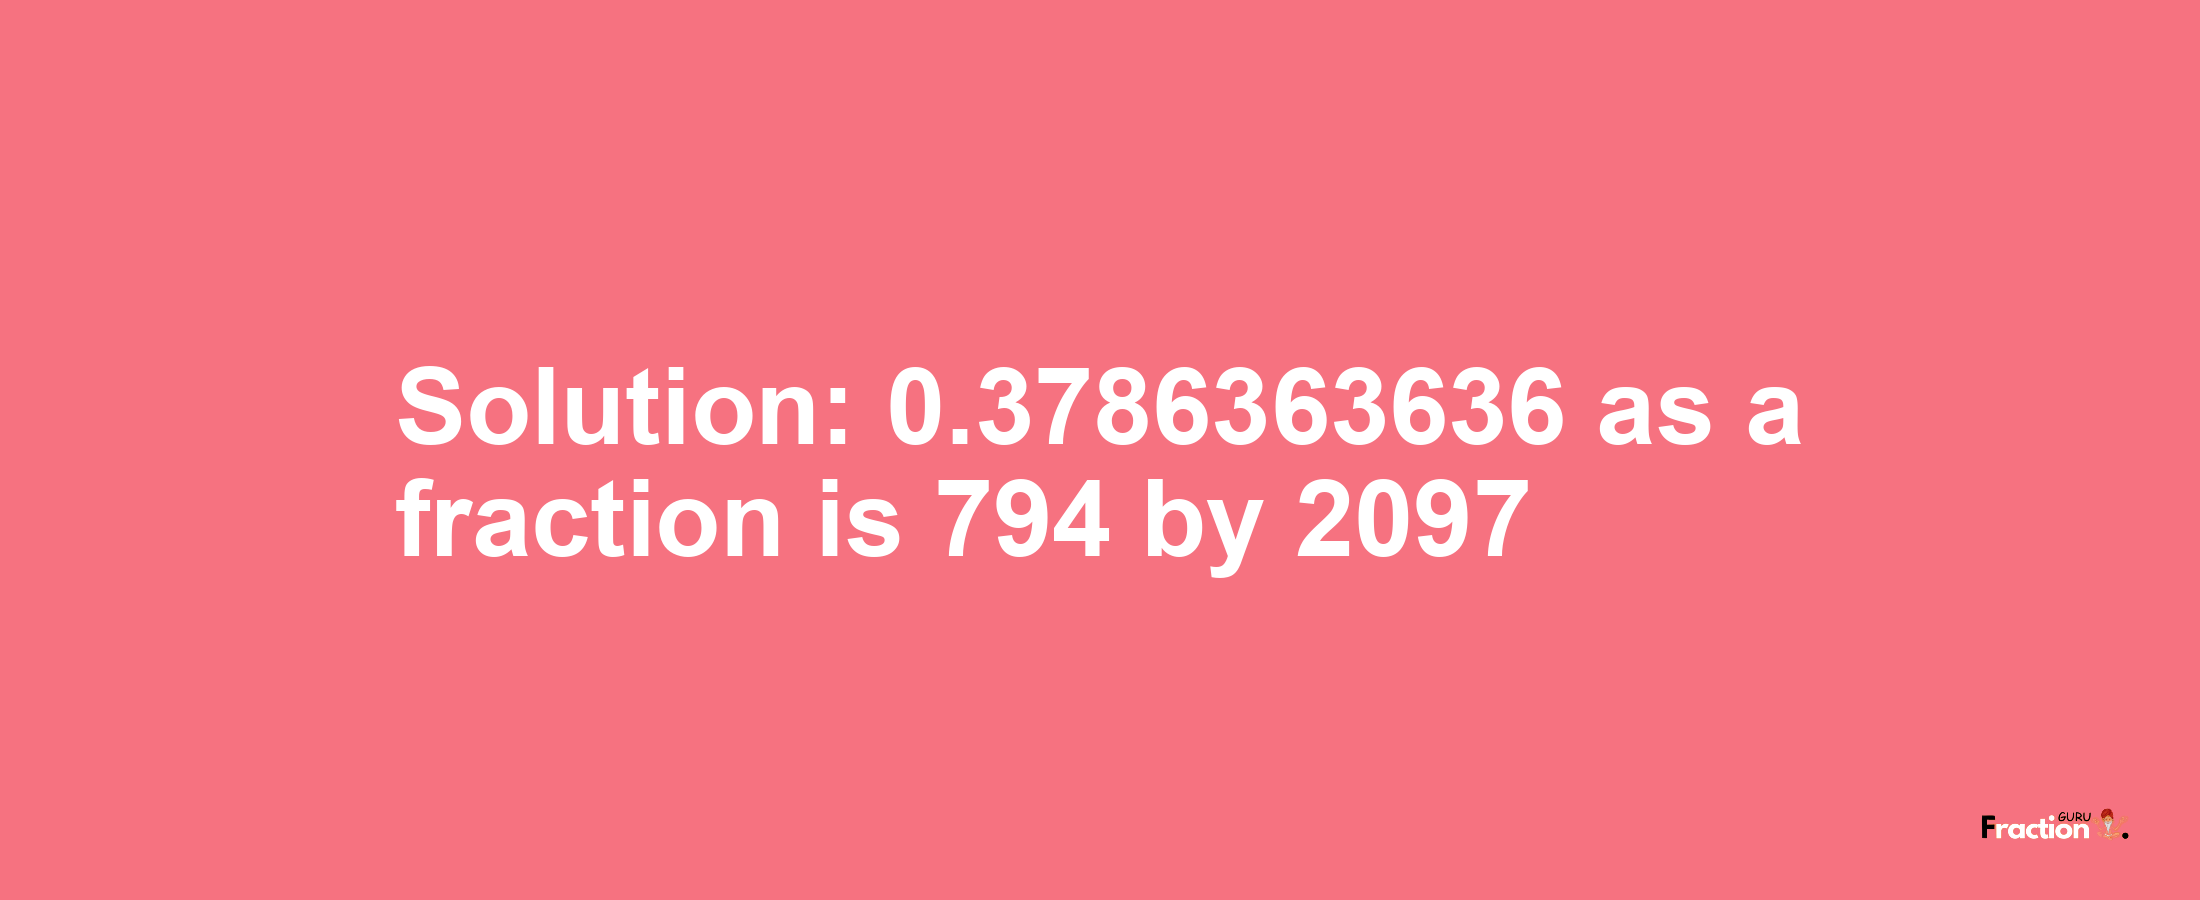 Solution:0.3786363636 as a fraction is 794/2097